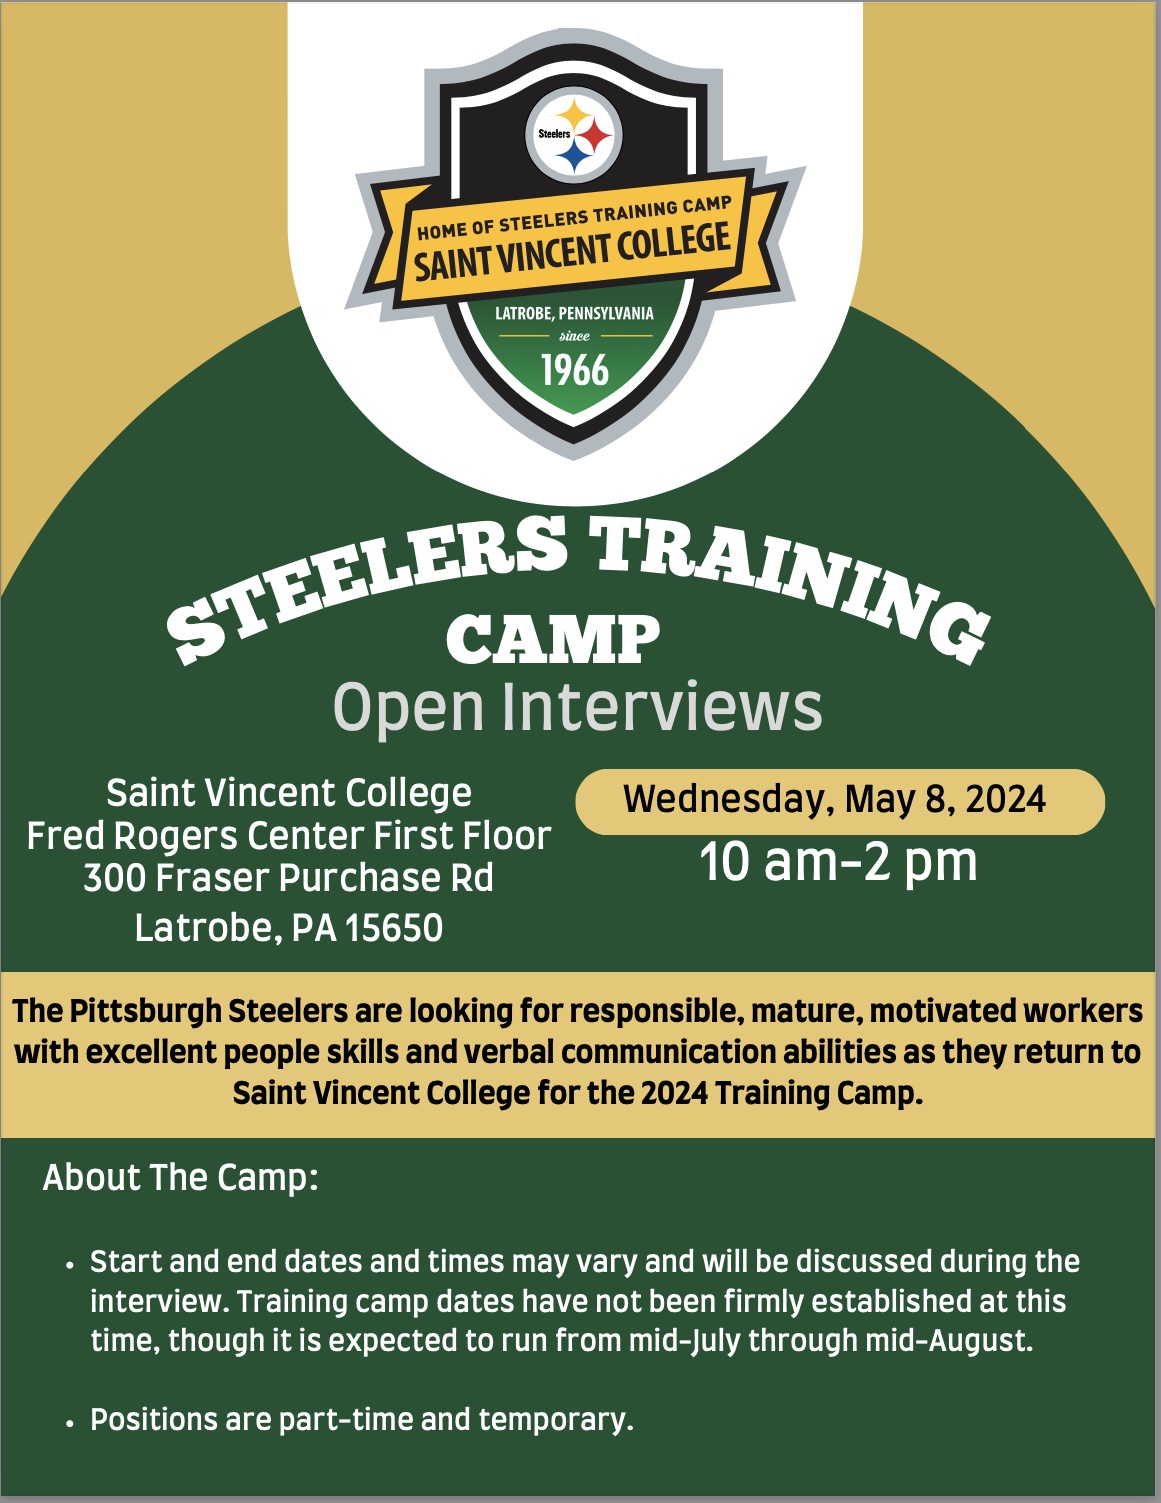 Hiring event set for 2024 Steelers training camp at SVC